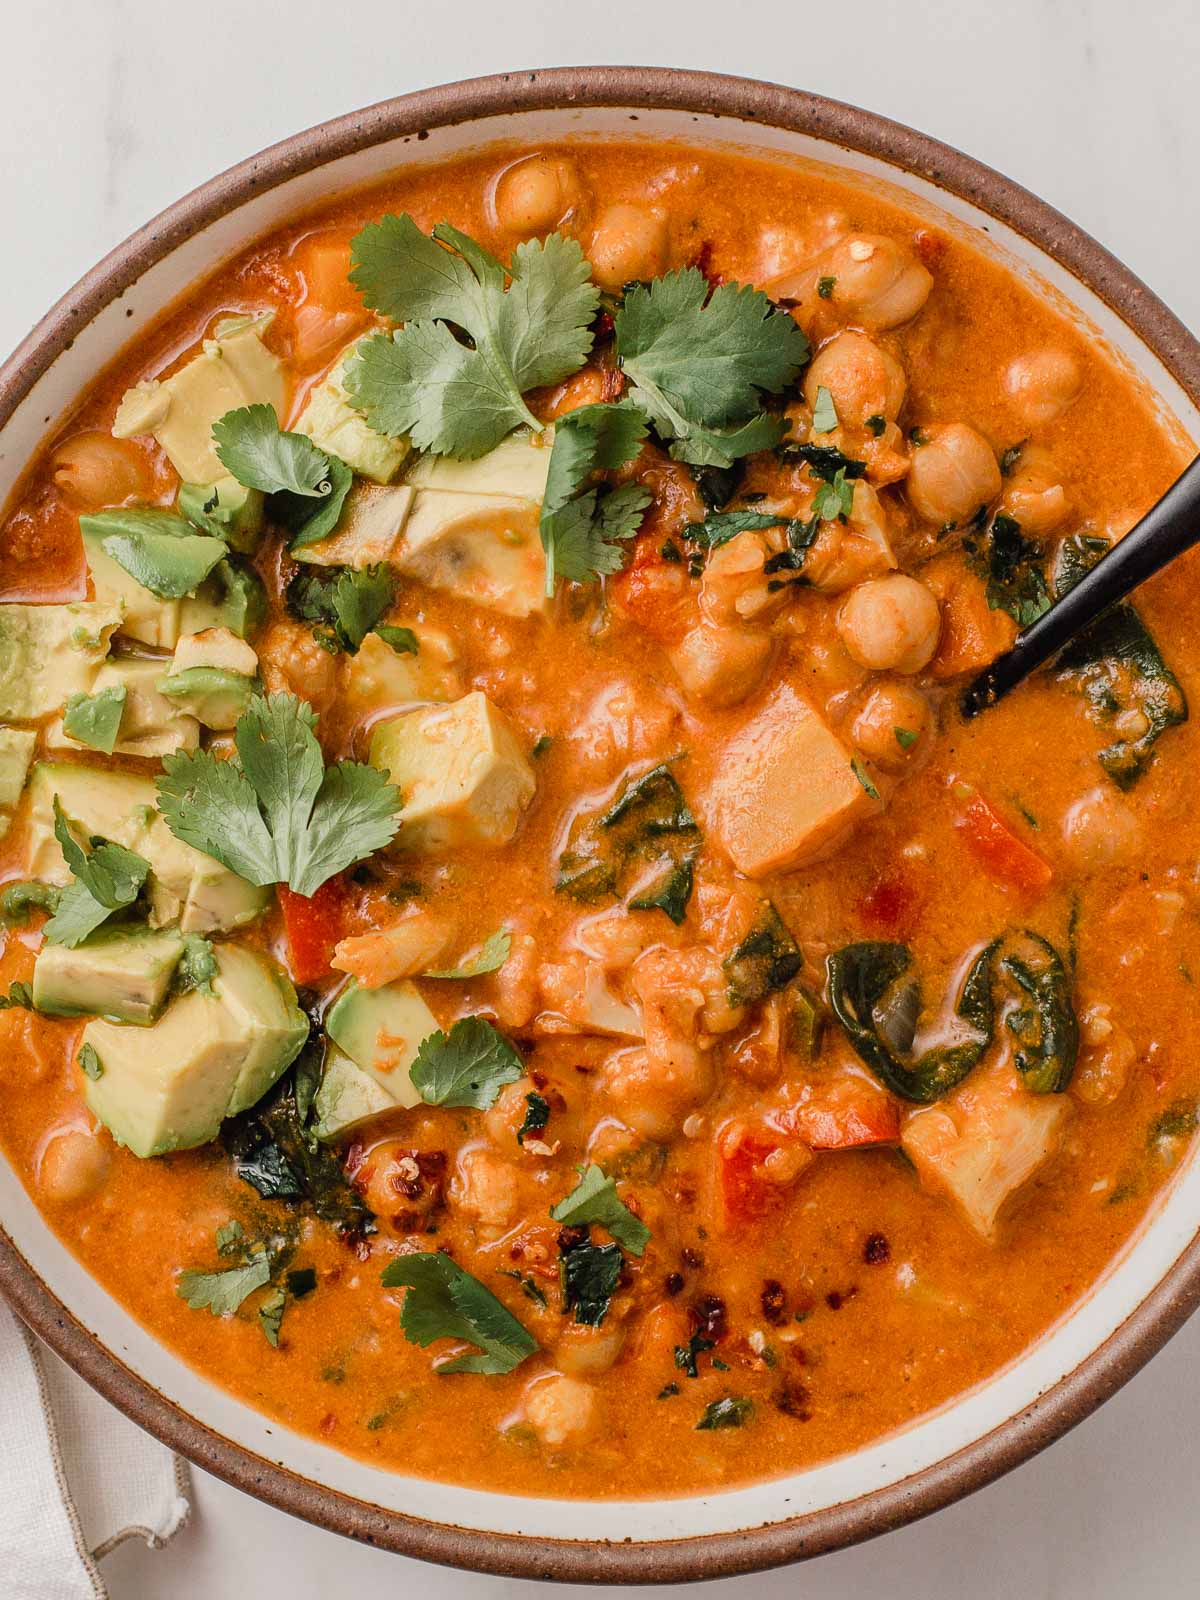 Chickpea cauliflower curry in a bowl.